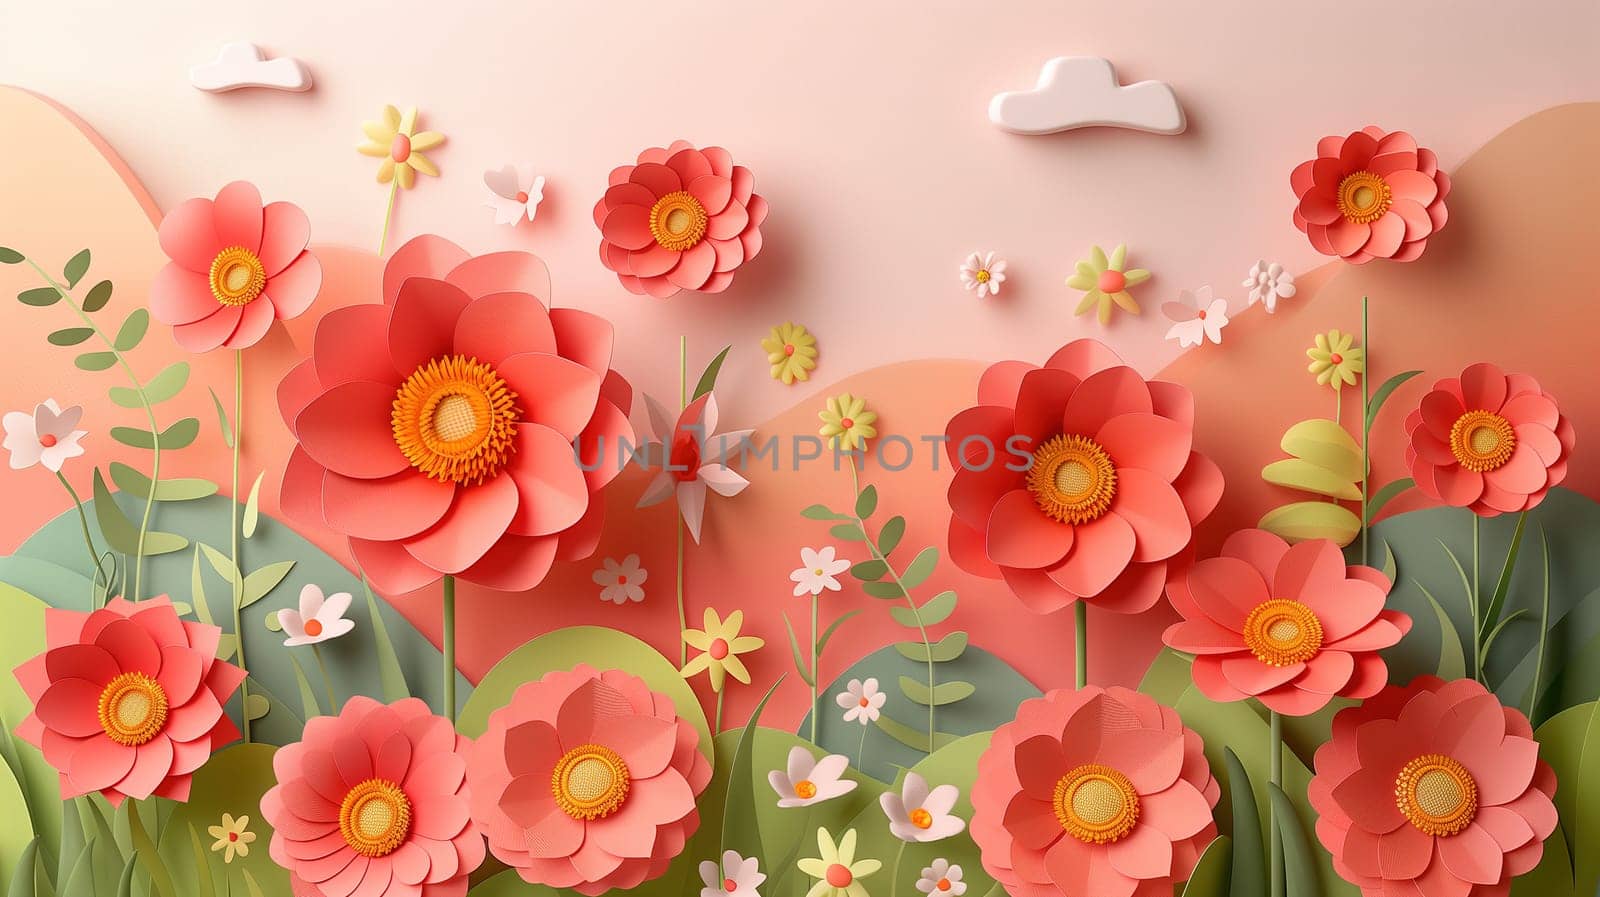 A detailed painting of colorful flowers adorning a soft pink wall, creating a lively and cheerful atmosphere. The flowers are intricately depicted with various shapes, sizes, and shades, adding a burst of color to the room.